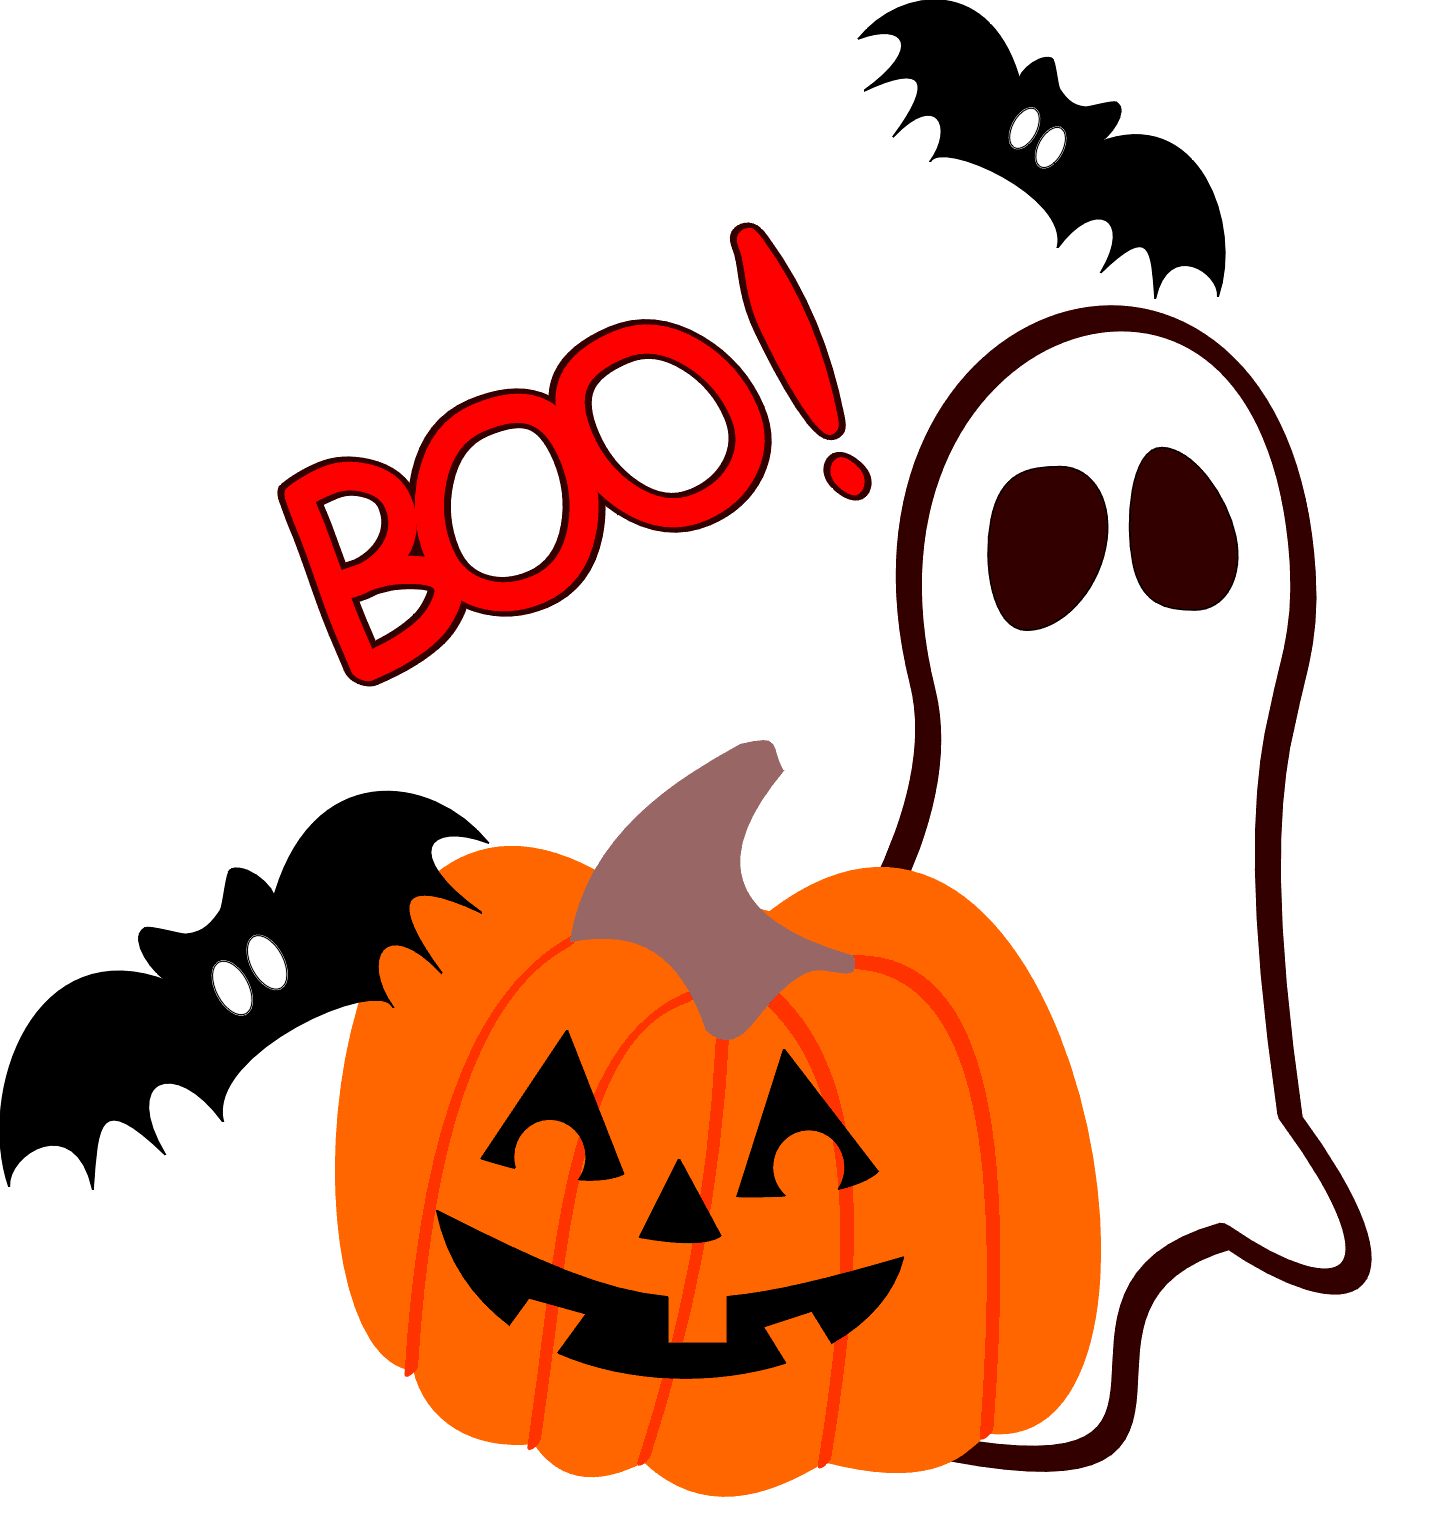 Halloween boo drawing free image download